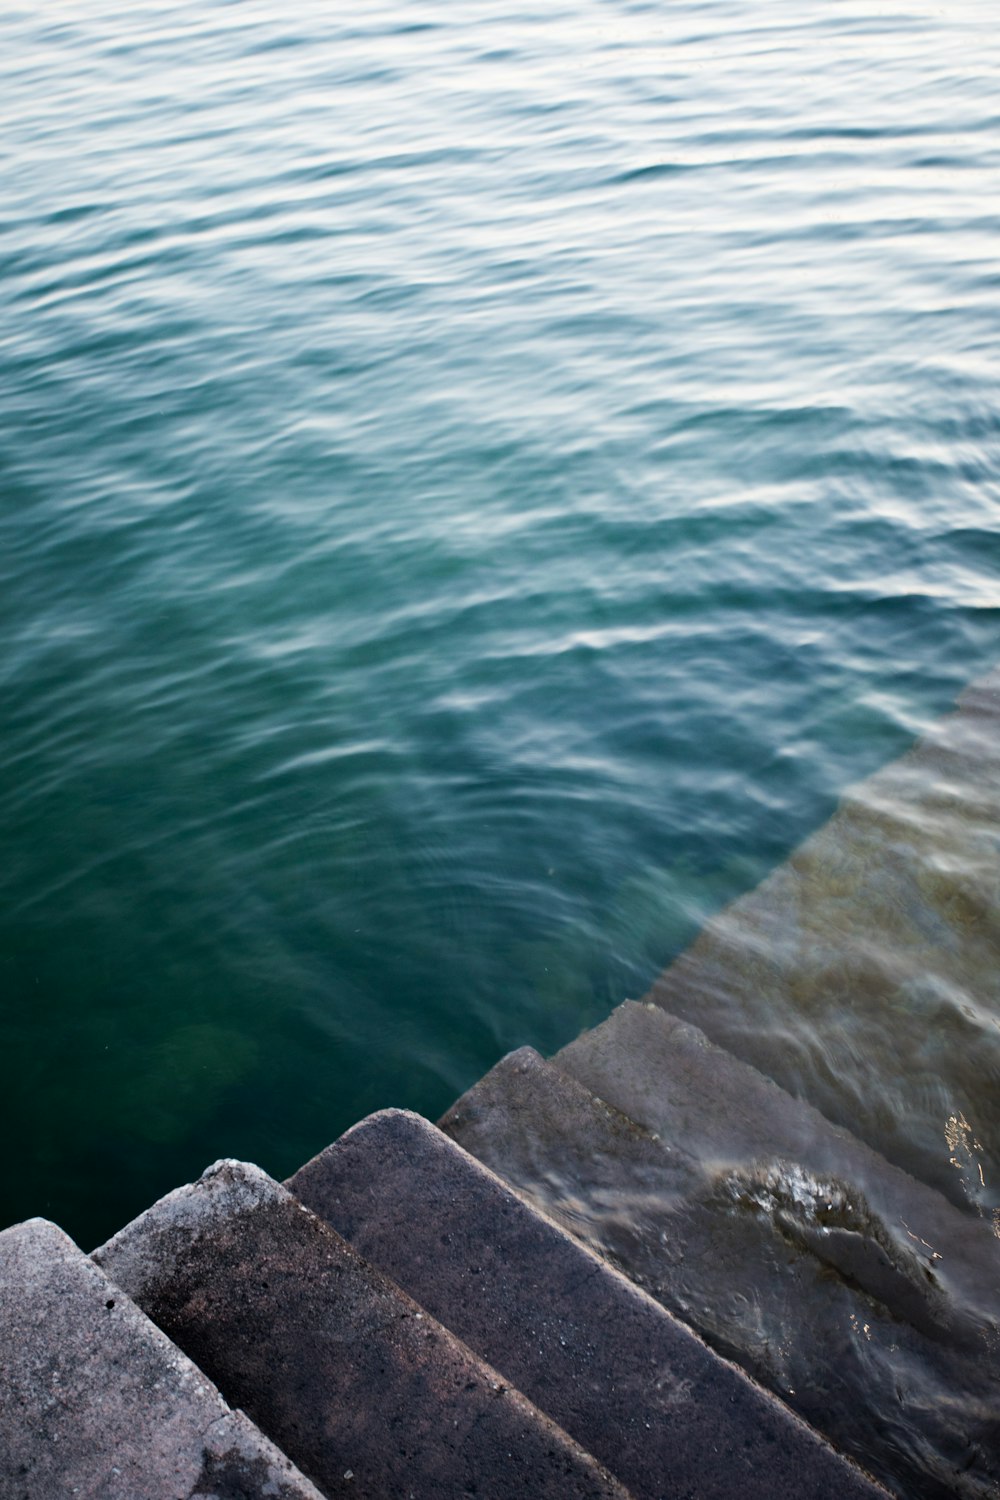 gray concrete stair in body of water